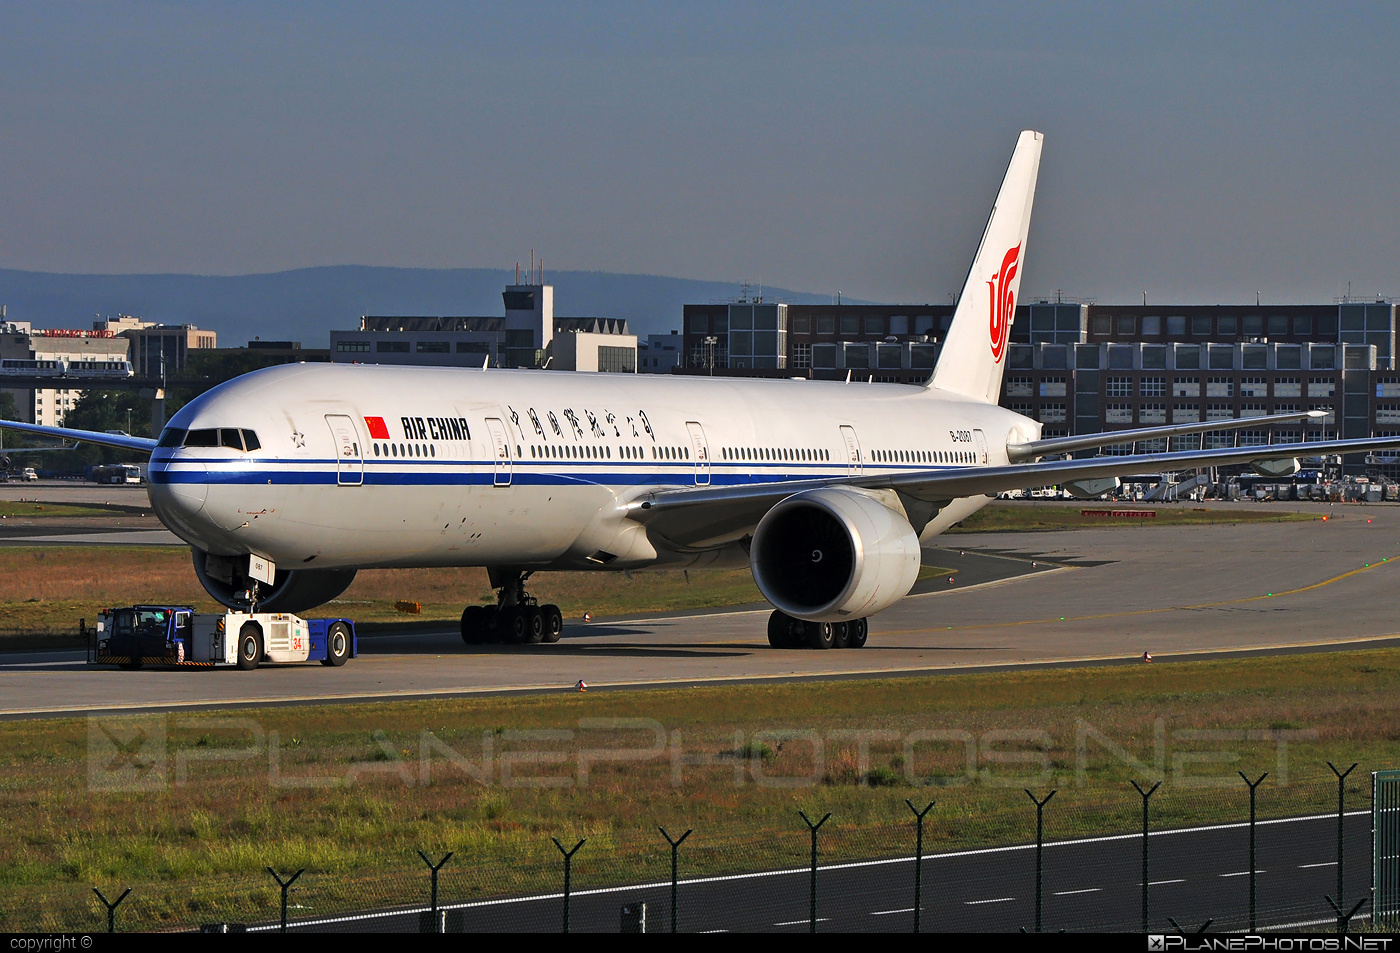 Boeing 777-300ER - B-2087 operated by Air China #airchina #b777 #b777er #boeing #boeing777 #tripleseven